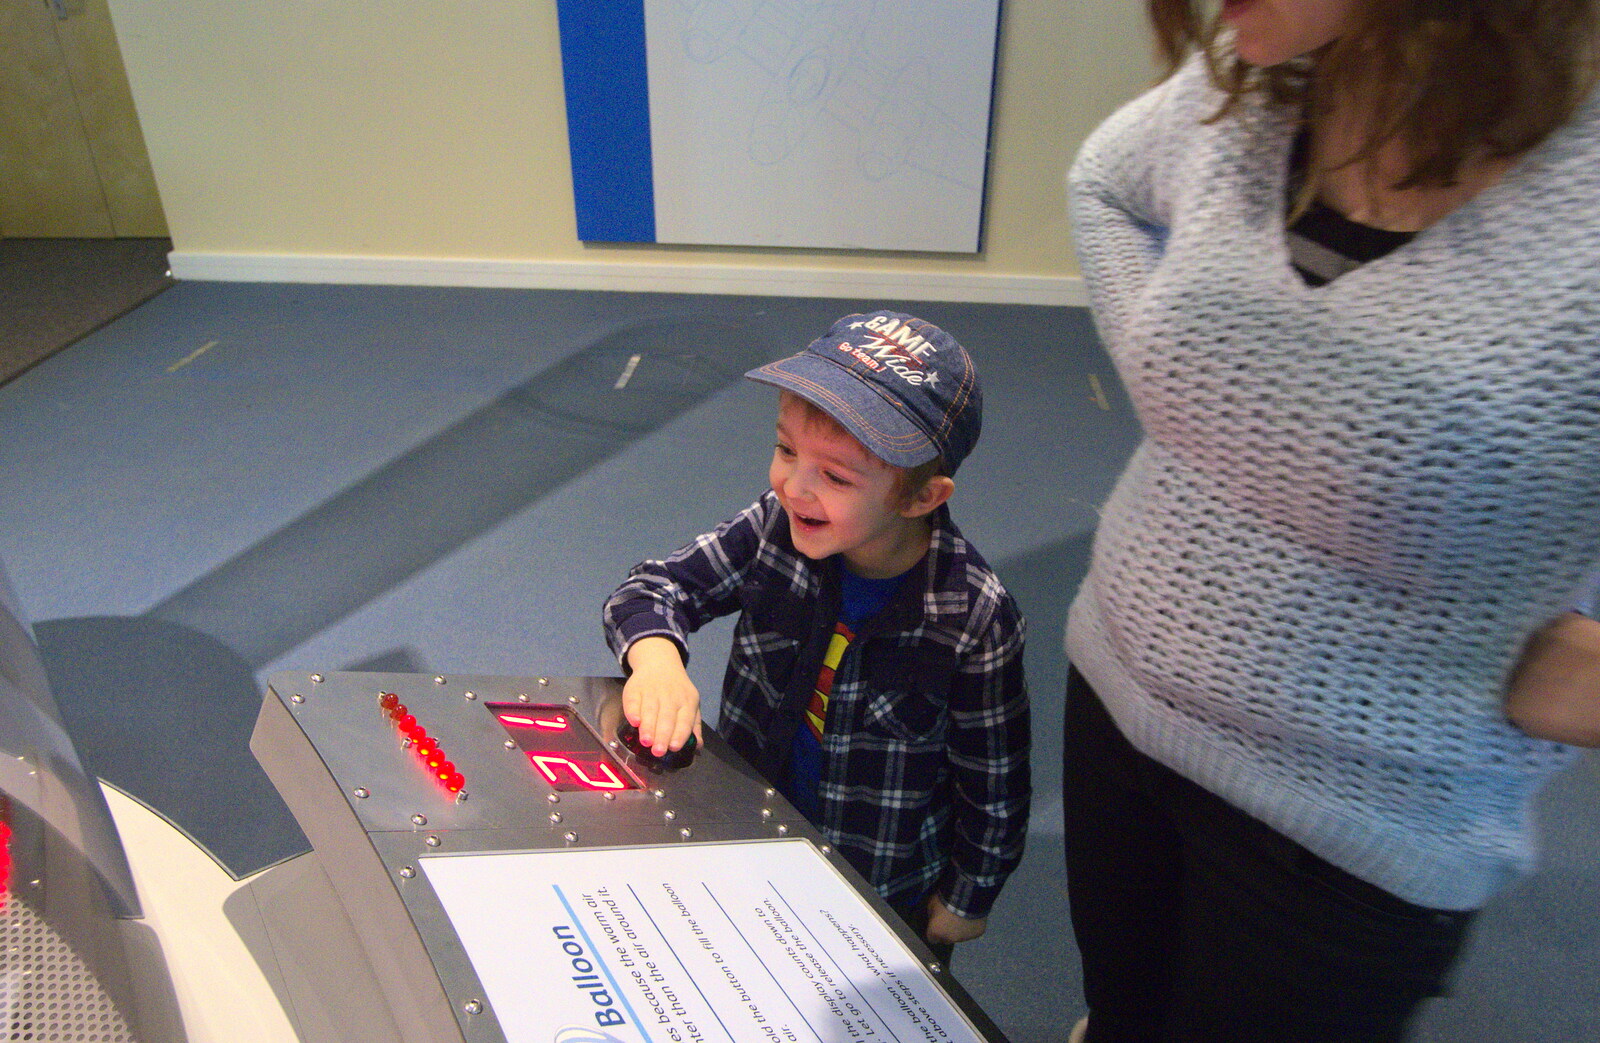 Fred has a go of some interactive exhibits from A Day Out at Duxford, Cambridgeshire - 9th March 2014